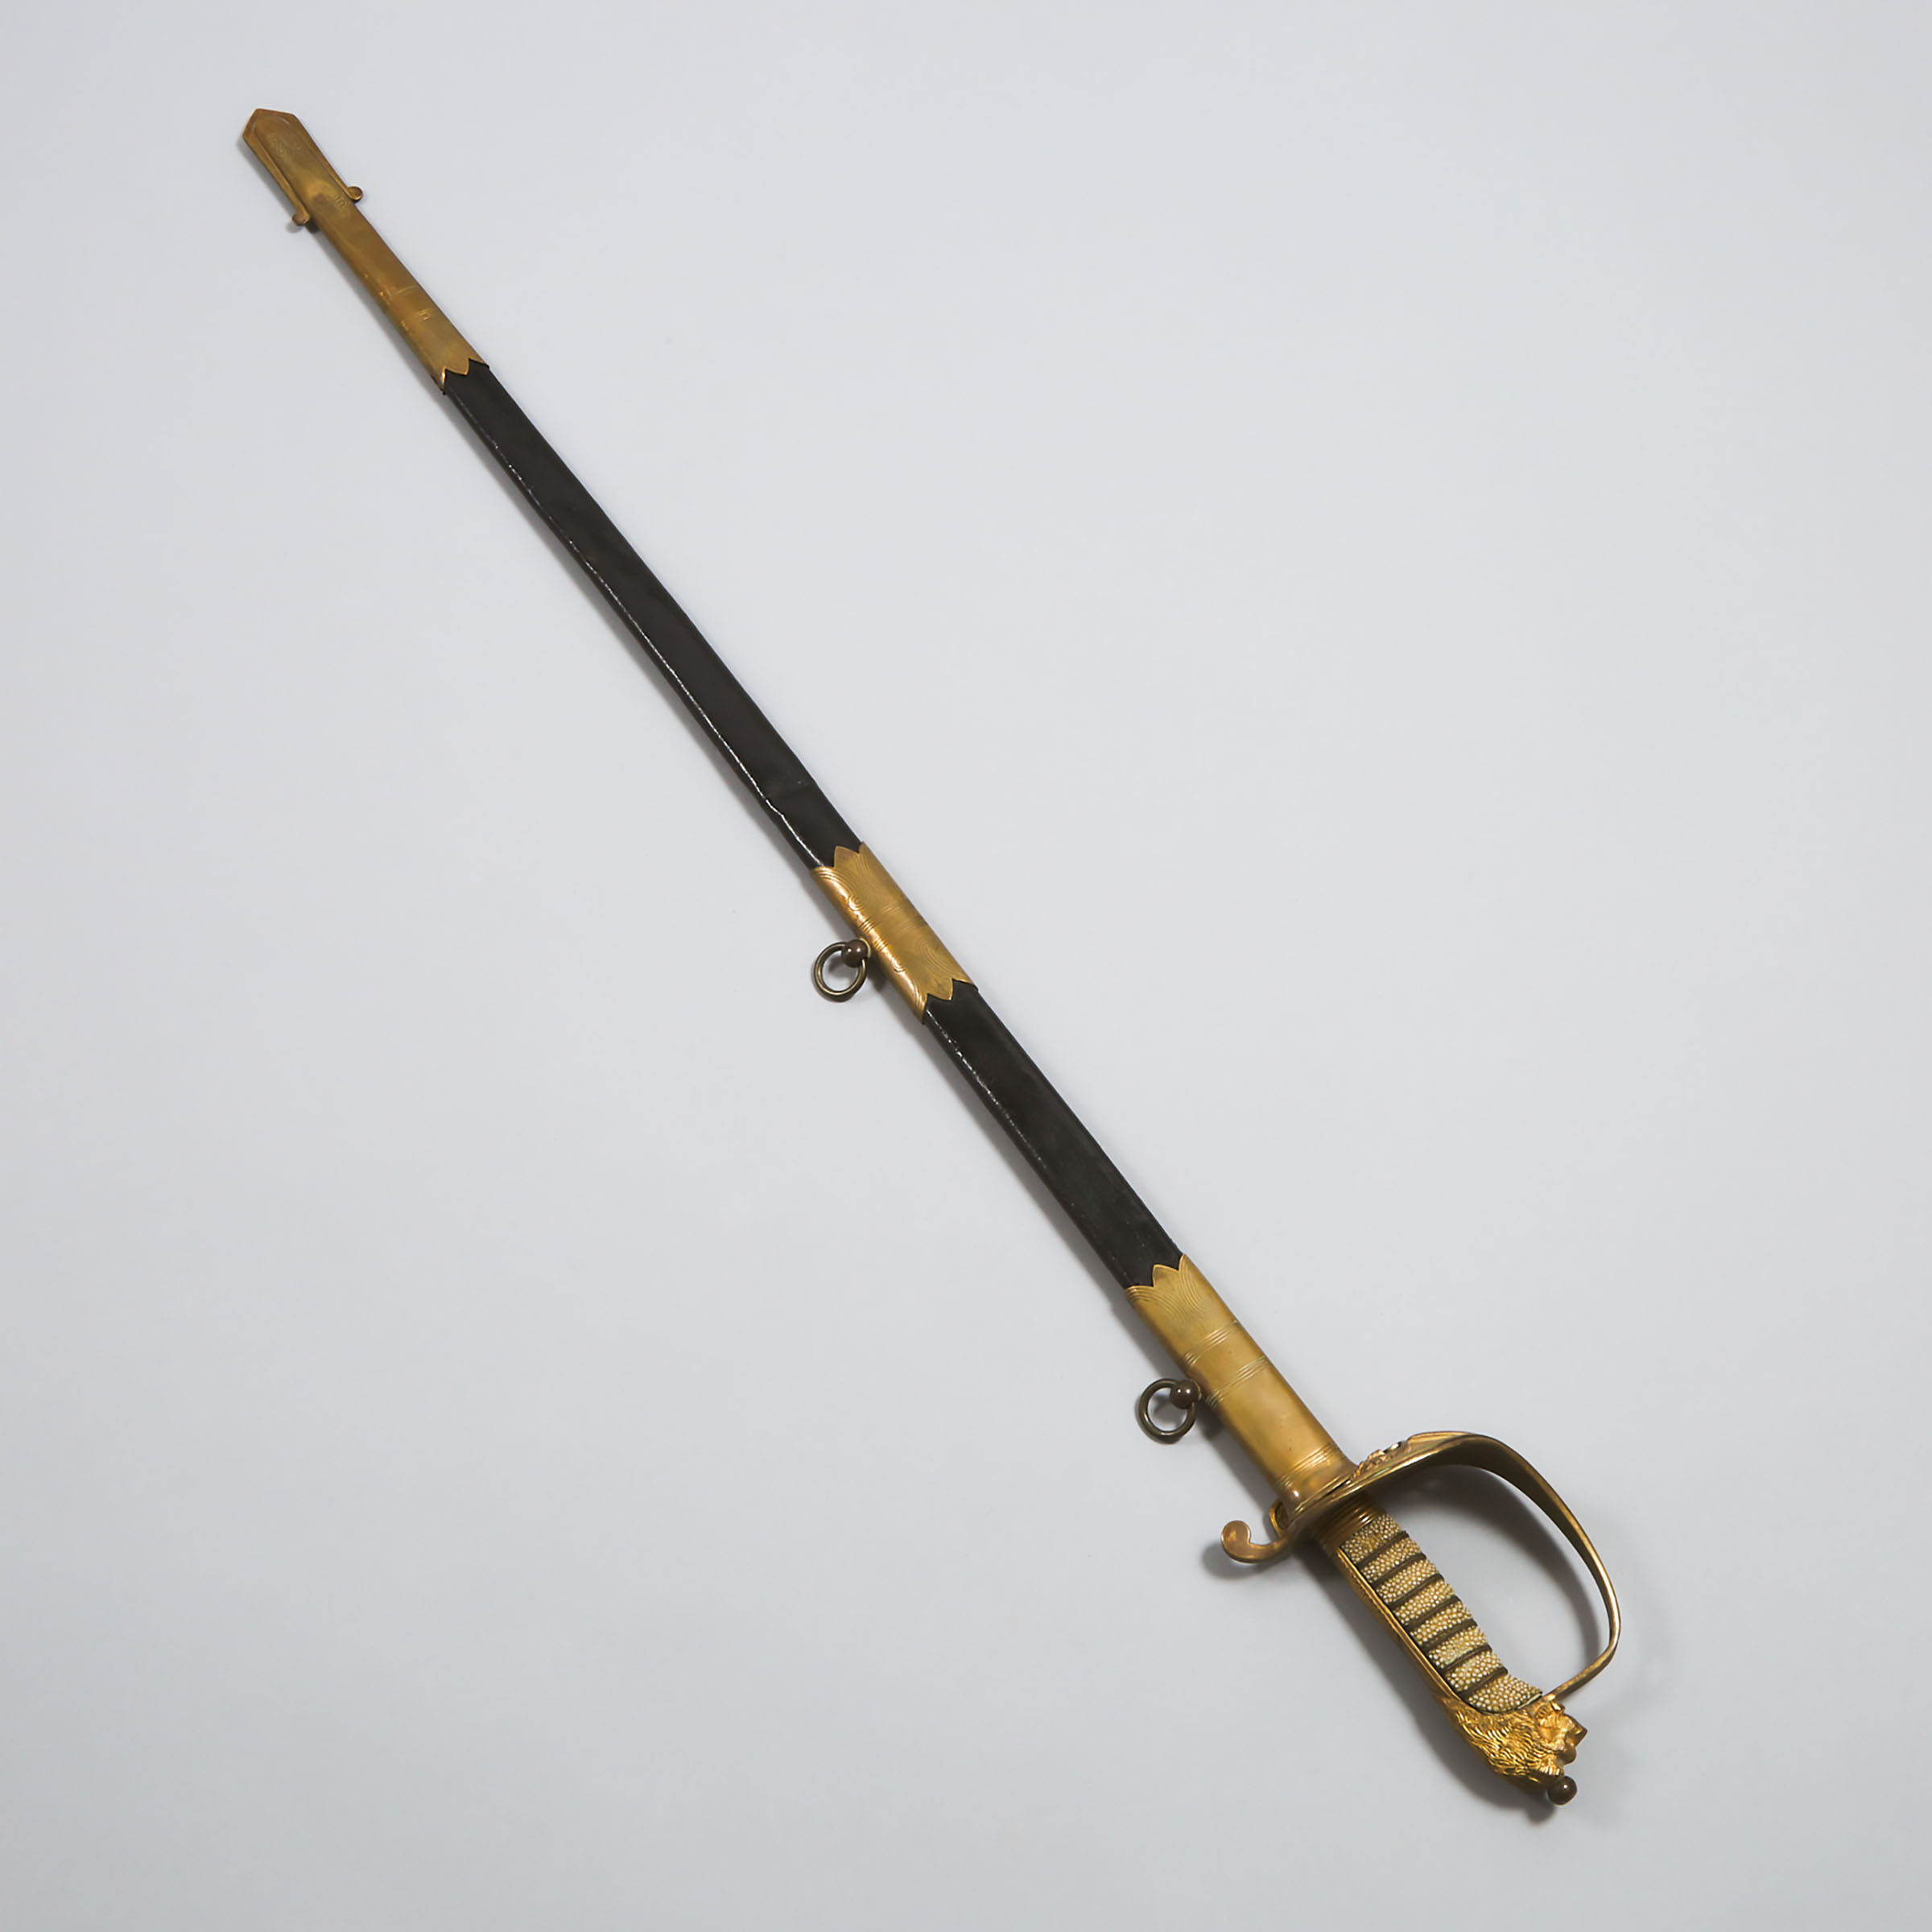 George V WWI Royal Navy Reserve Officer's Sword, J.R. Gaunt & Son, London, early 20th century